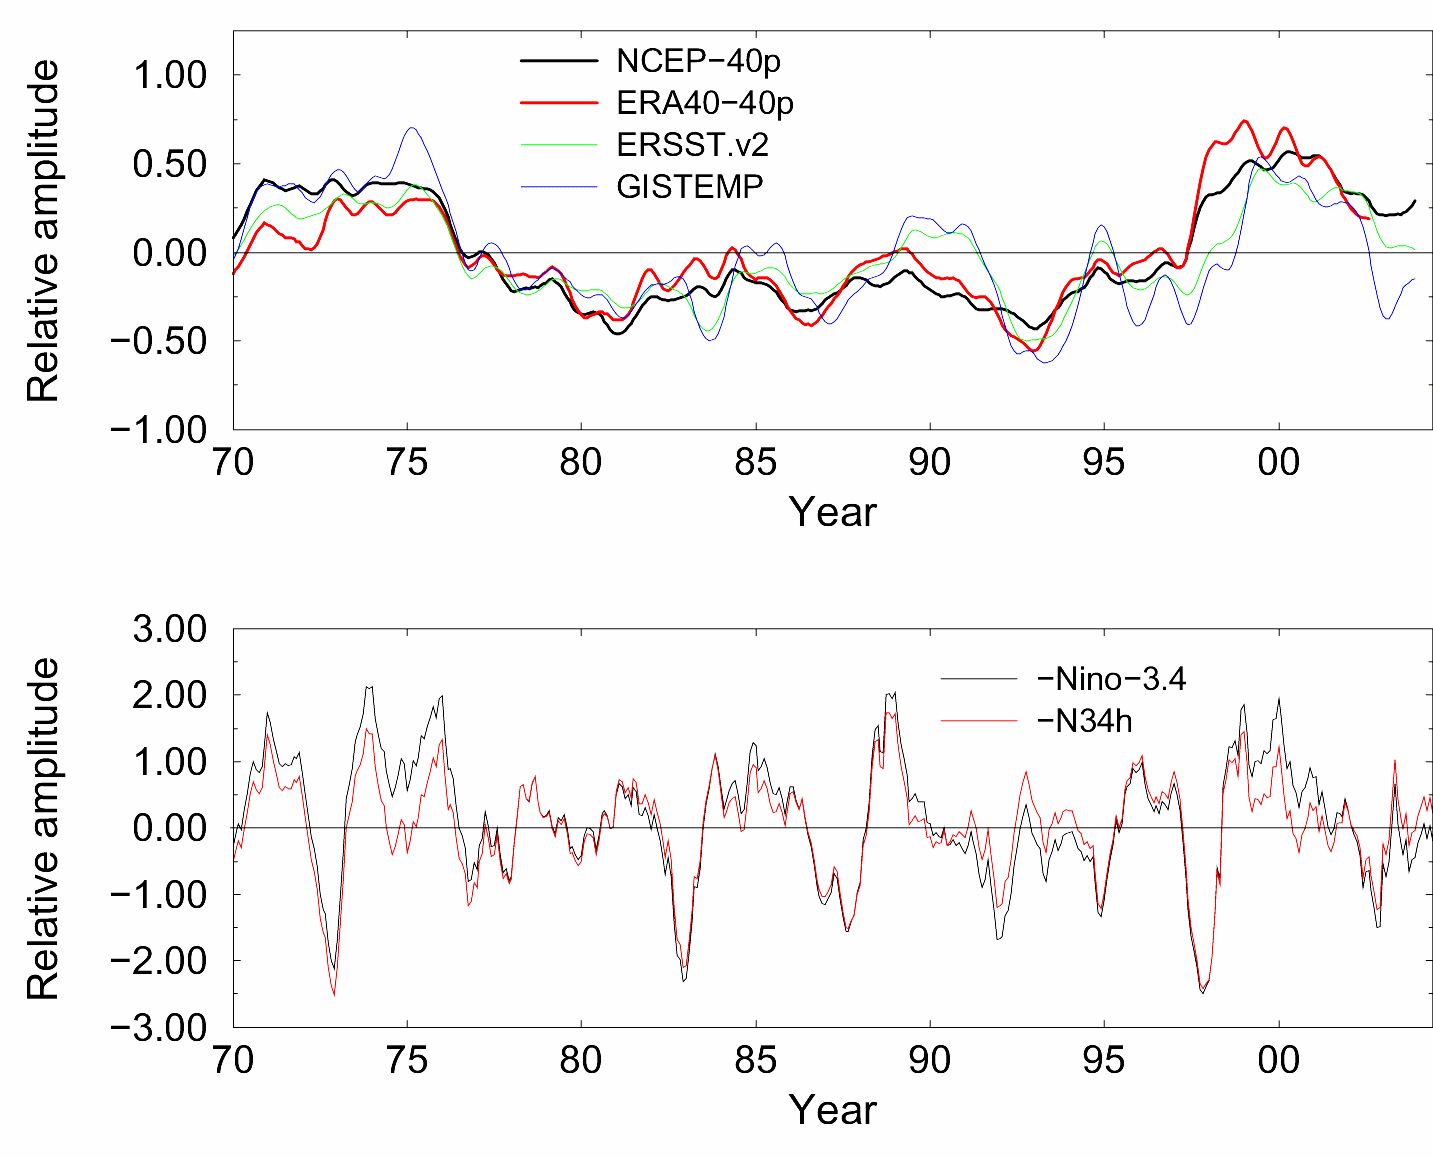 The time series of the PDV mode based on NCEP/NCAR